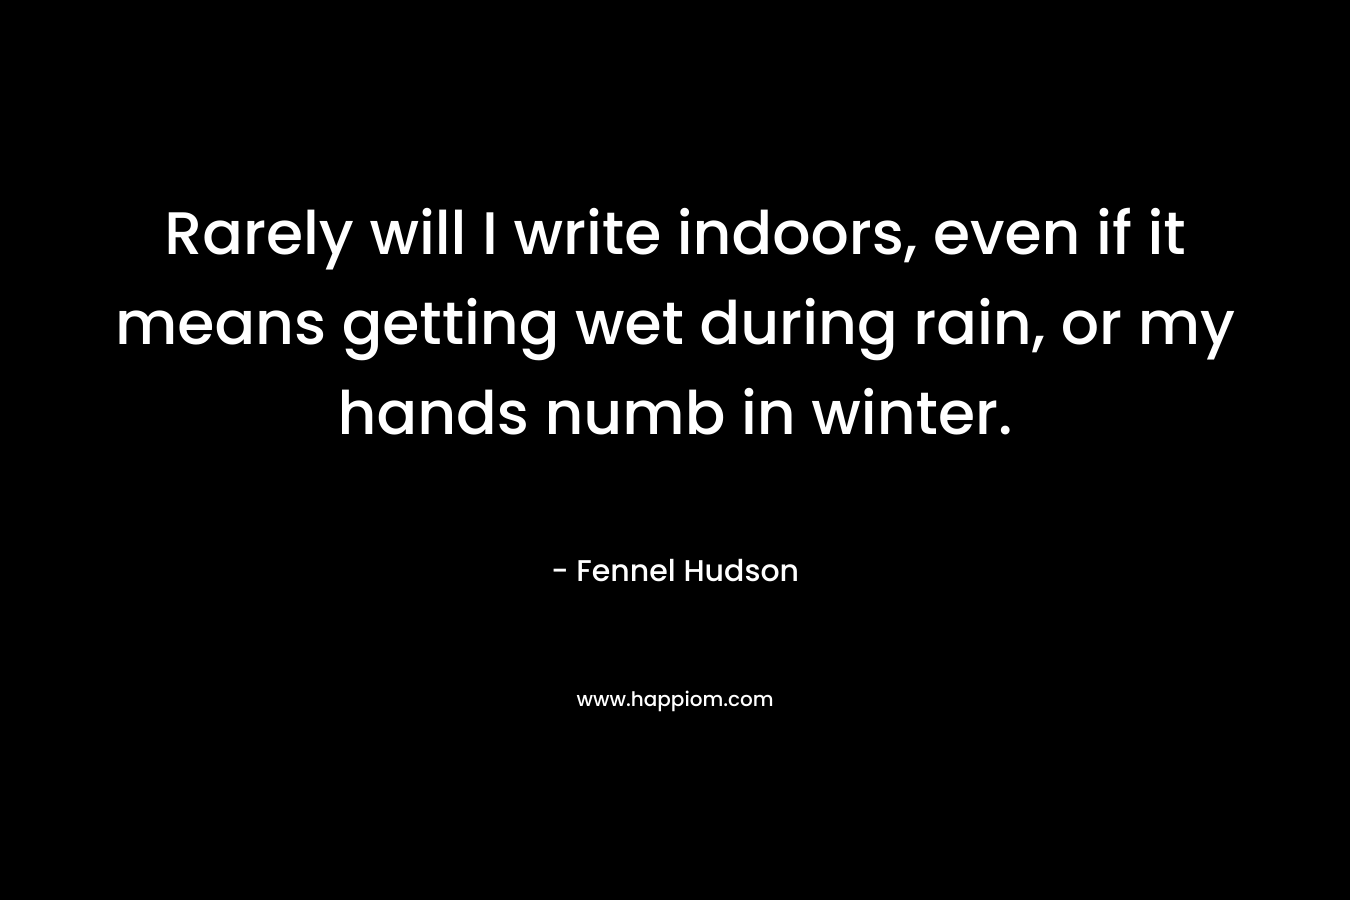 Rarely will I write indoors, even if it means getting wet during rain, or my hands numb in winter. – Fennel Hudson